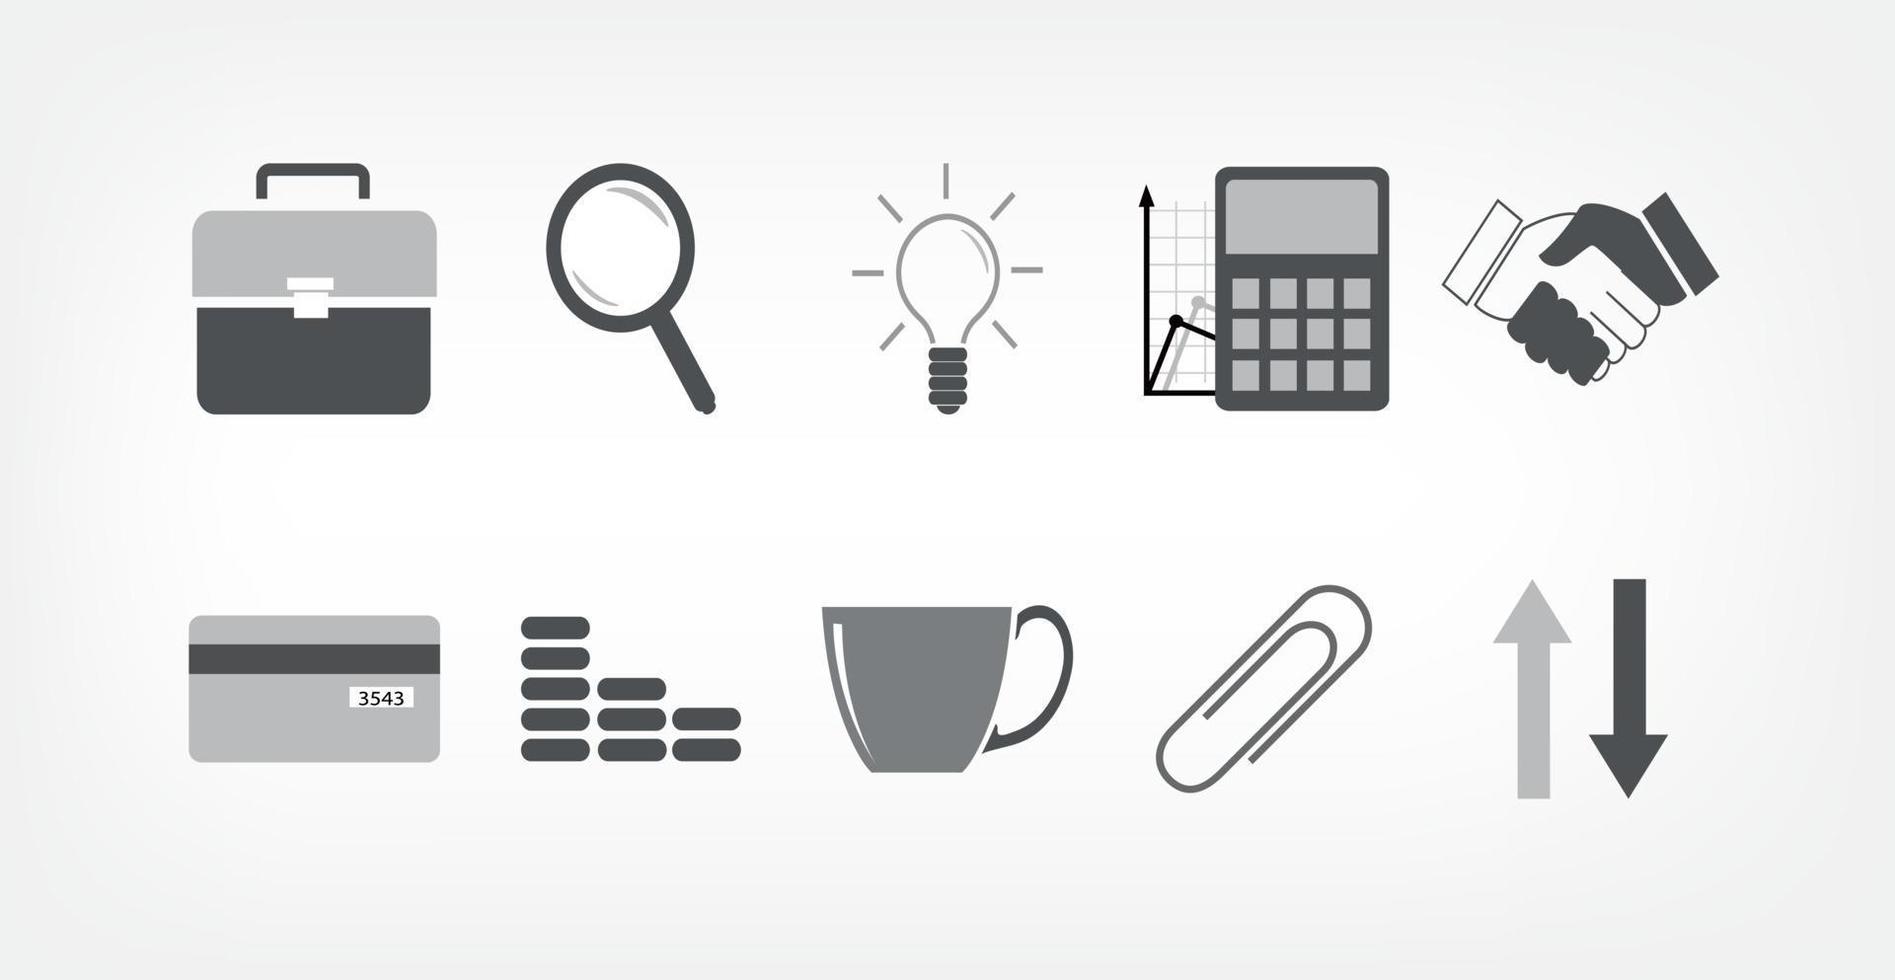 Business icon, Vector. icon business corporate black on white background. Set of flat design icons for Business. vector